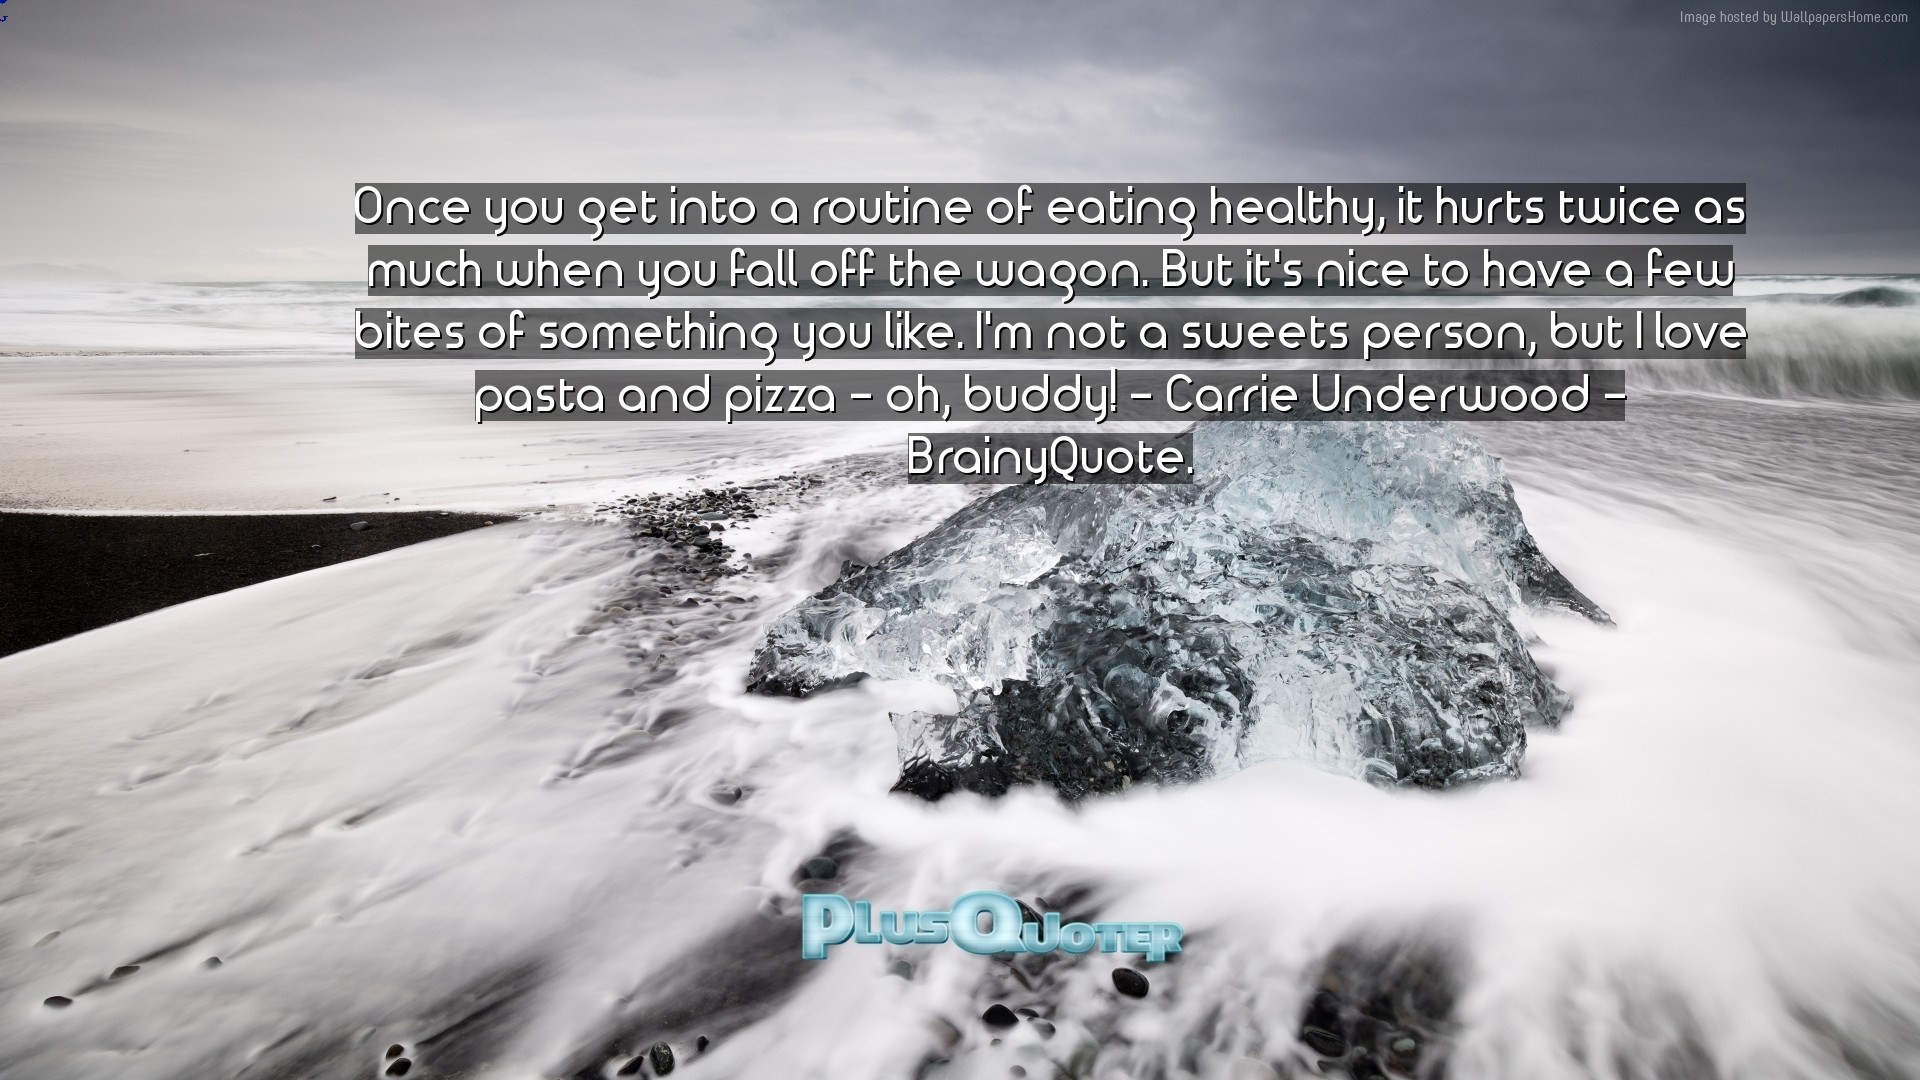 1920x1080 Download Wallpaper with inspirational Quotes- "Once you get into a routine  of eating healthy